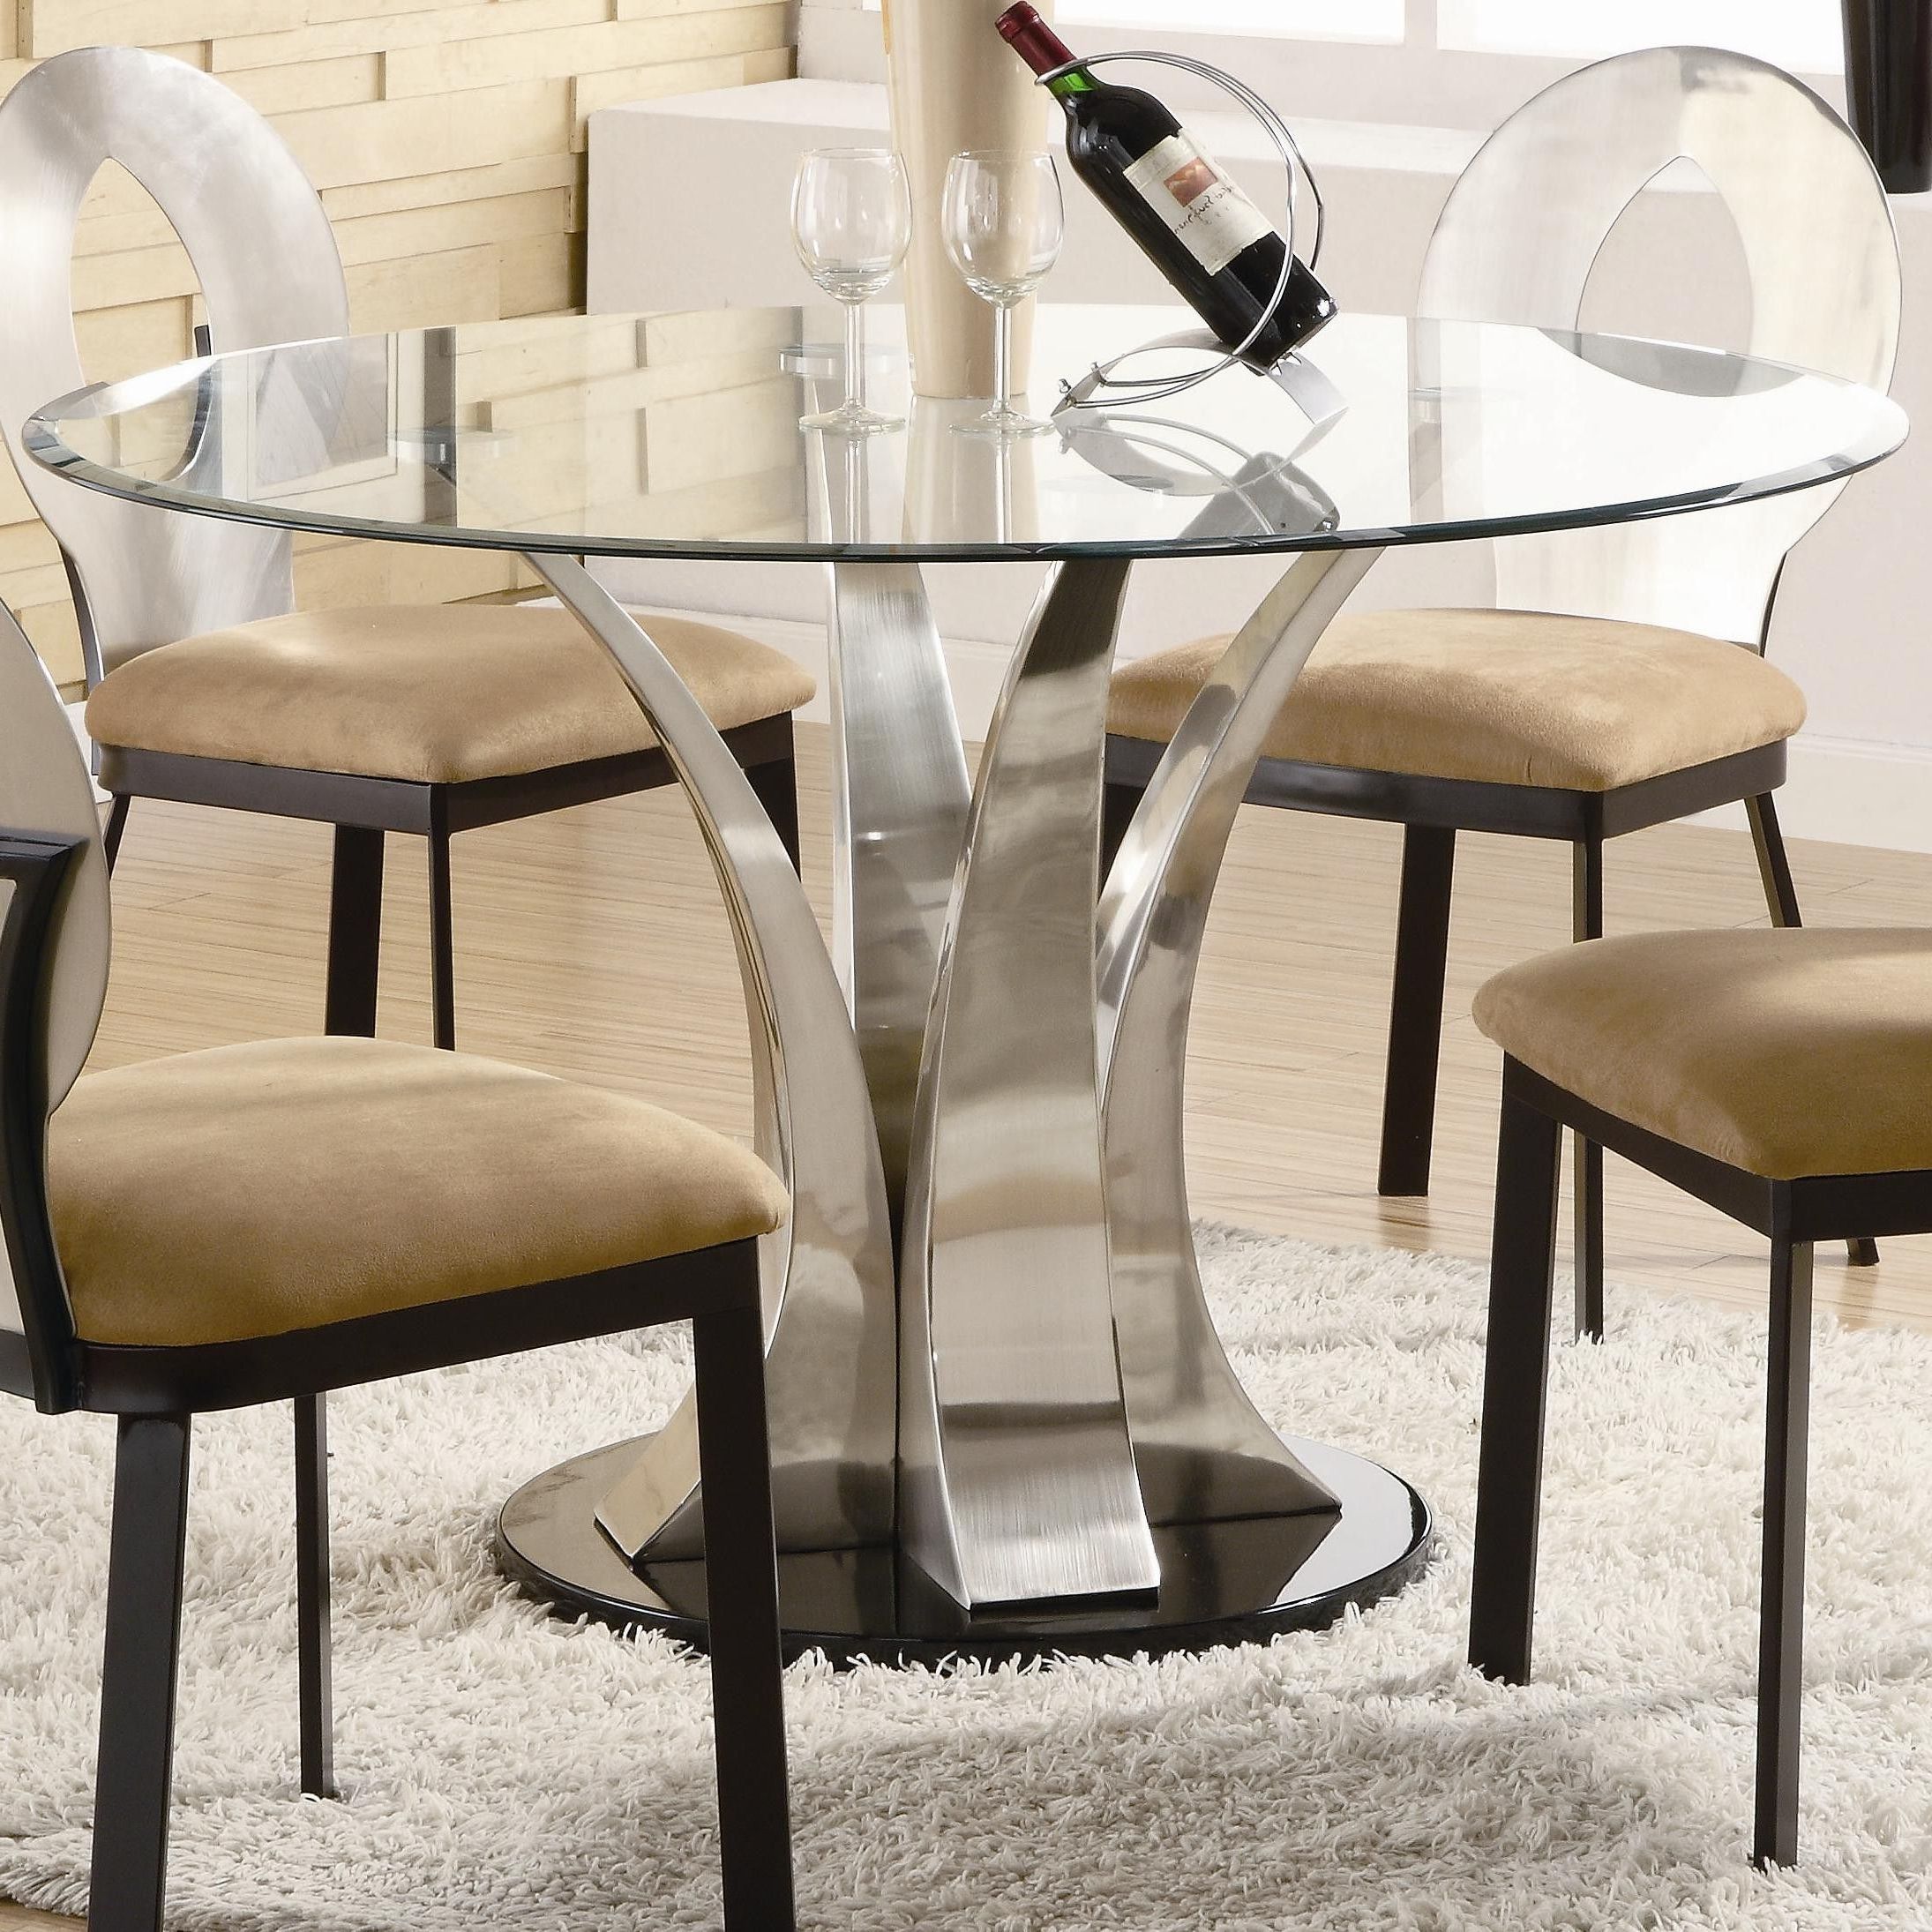 Explore Photos of Elegance Small Round Dining Tables (Showing 1 of 30 ...